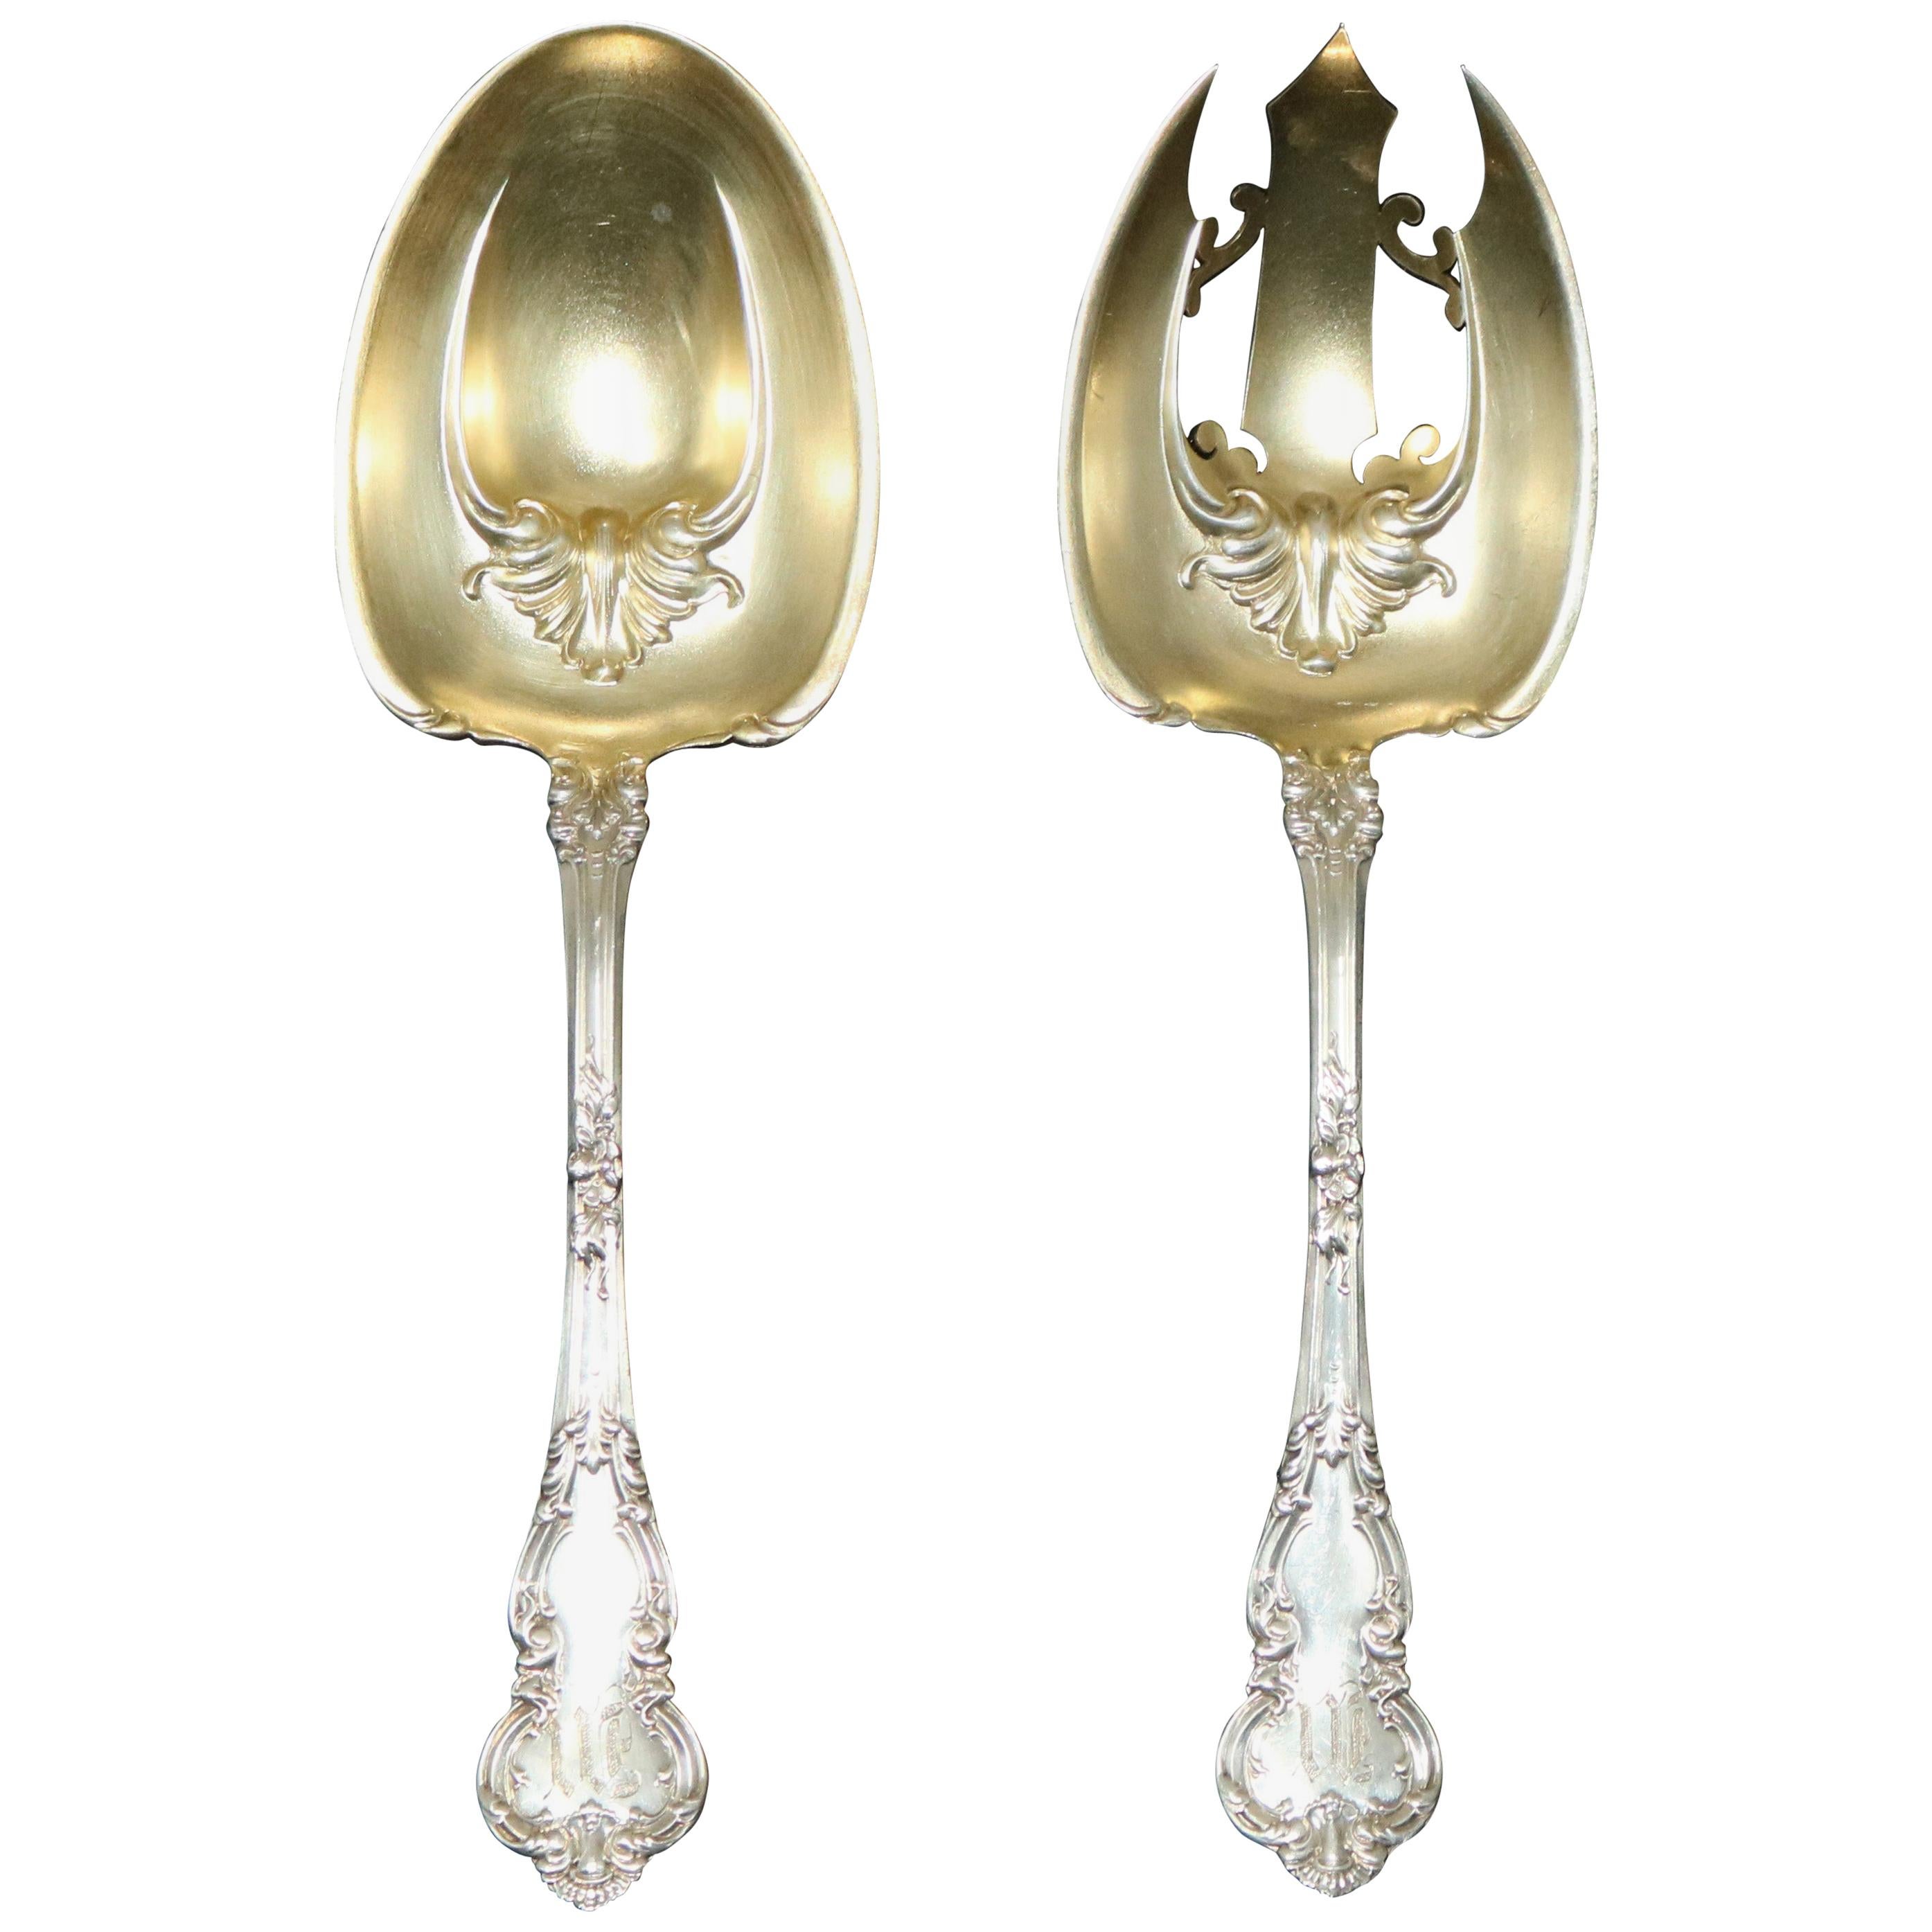 Set of Antique Sterling Silver Serving Utensils with Gold Wash Bowls, circa 1900